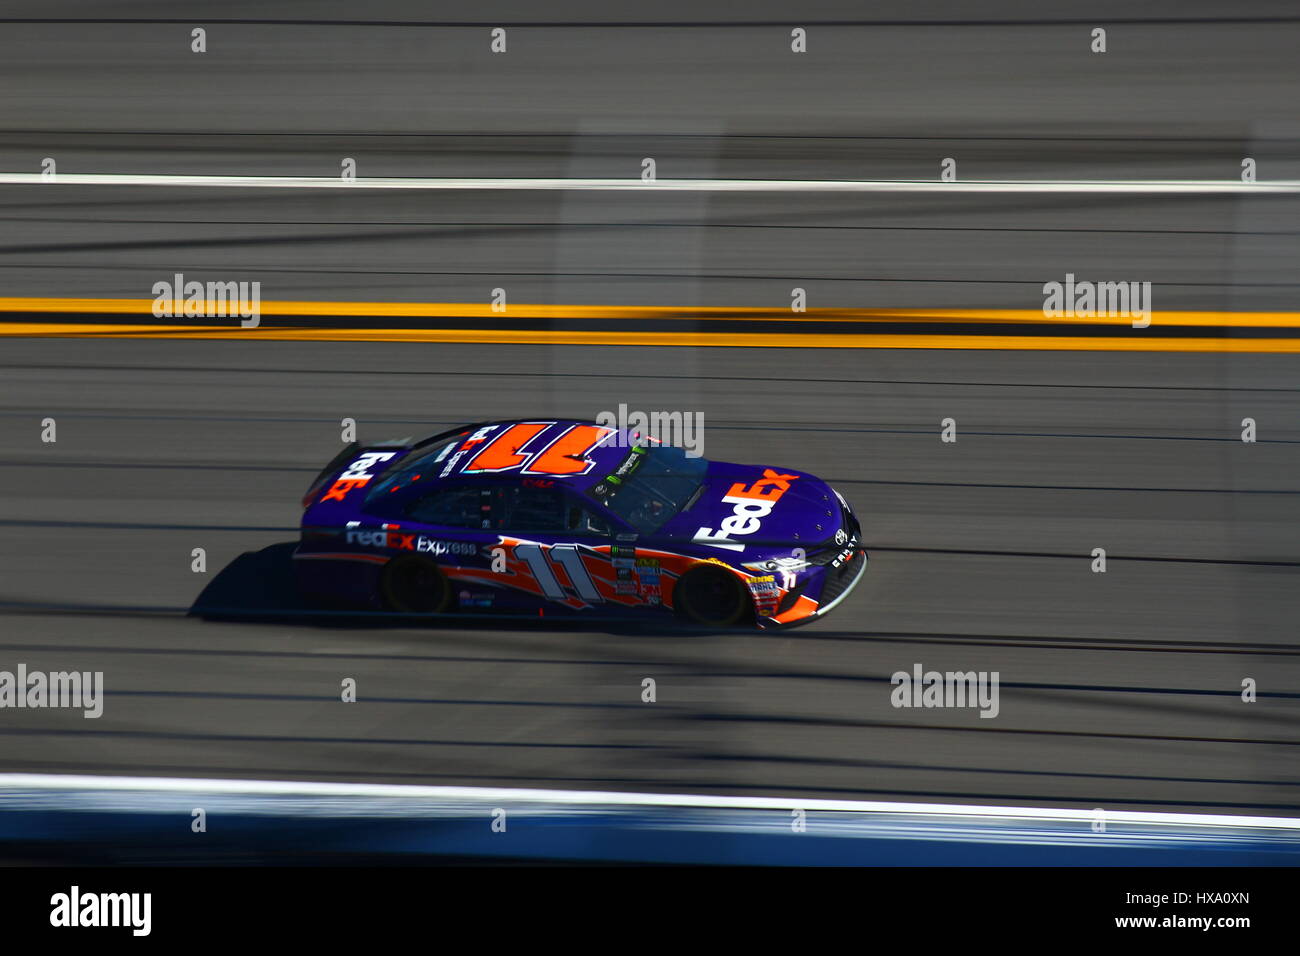 Denny Hamlin makes his way to the start finish line of Daytona International Speedway going 180mph in his Fedex Livery Toyota Camry. Stock Photo